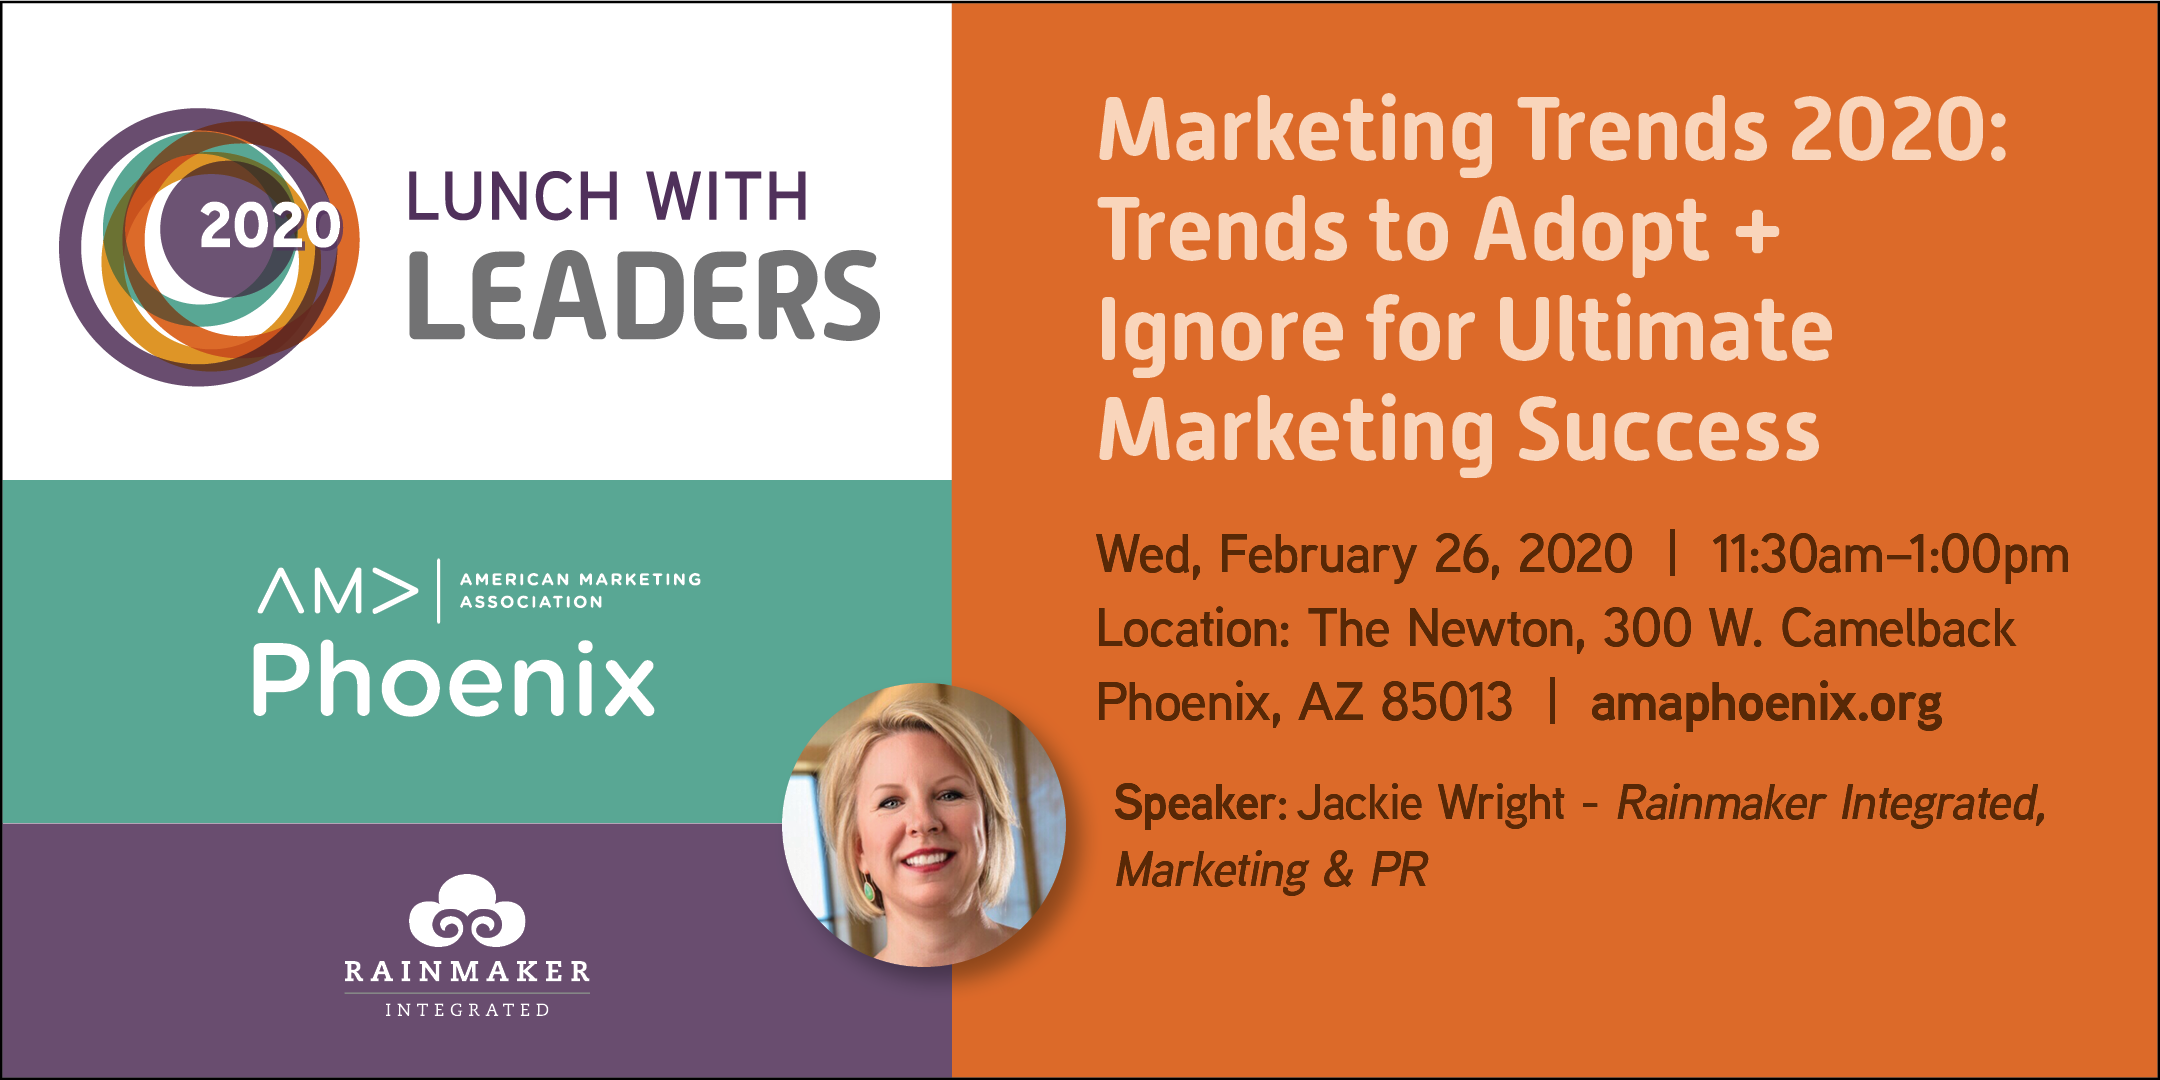 Marketing Trends 2020: Trends to Adopt & Ignore for Ultimate Success